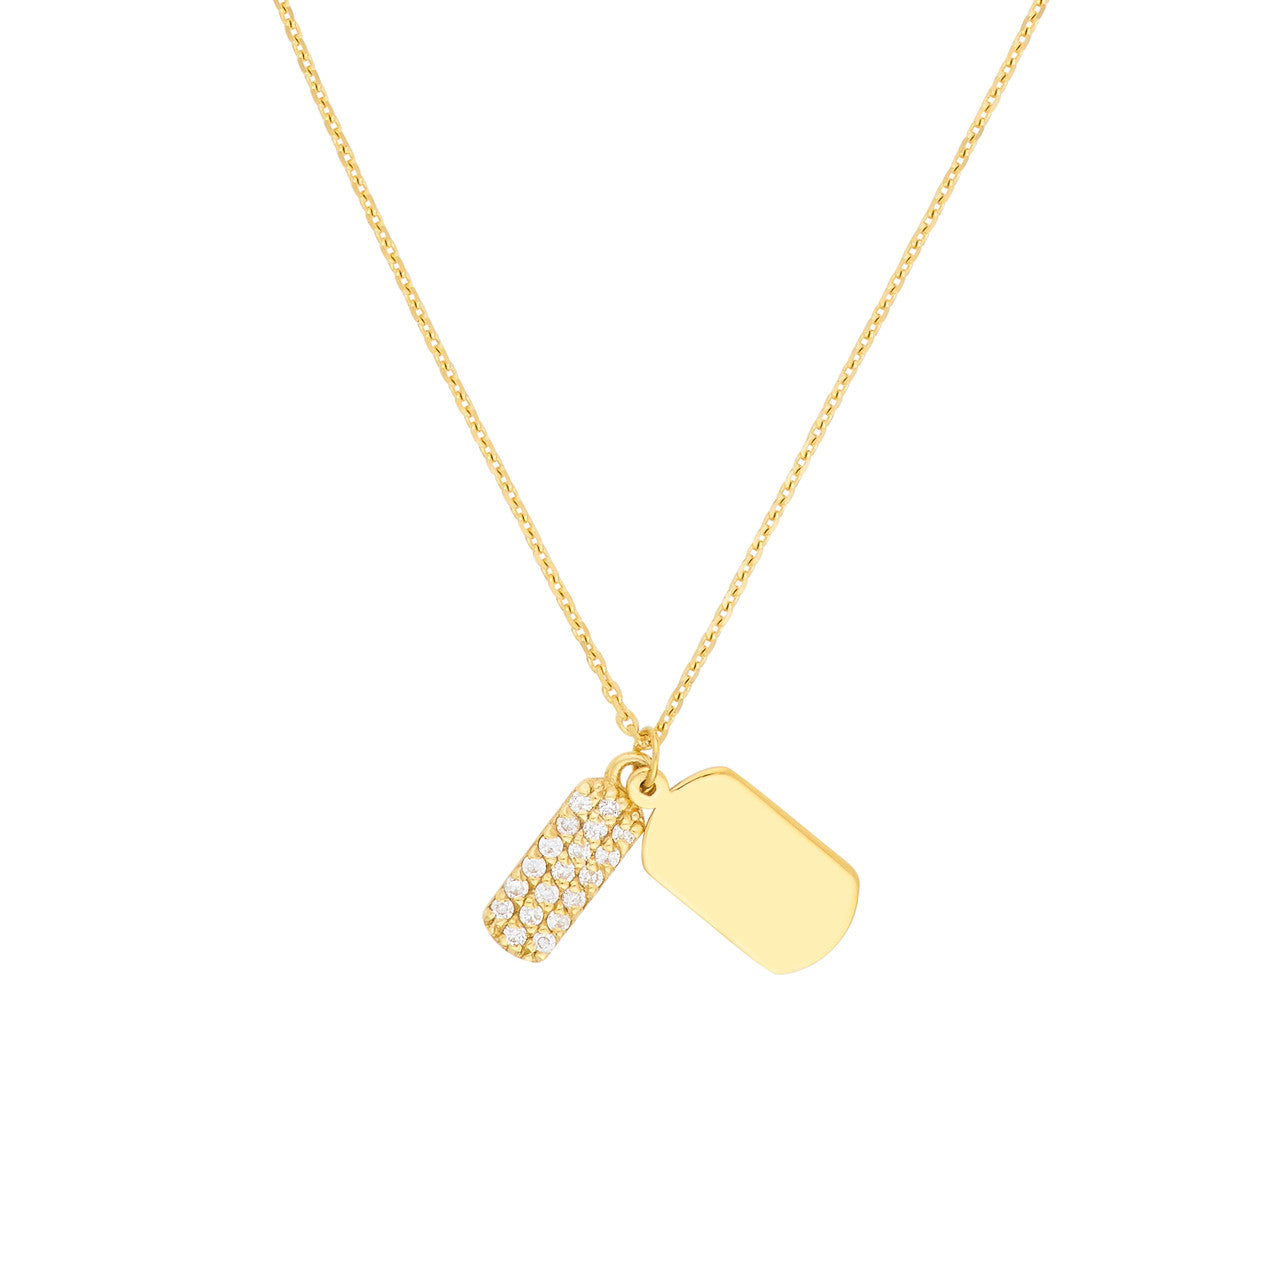 Mini Double Dog Tag with Diamonds Necklace